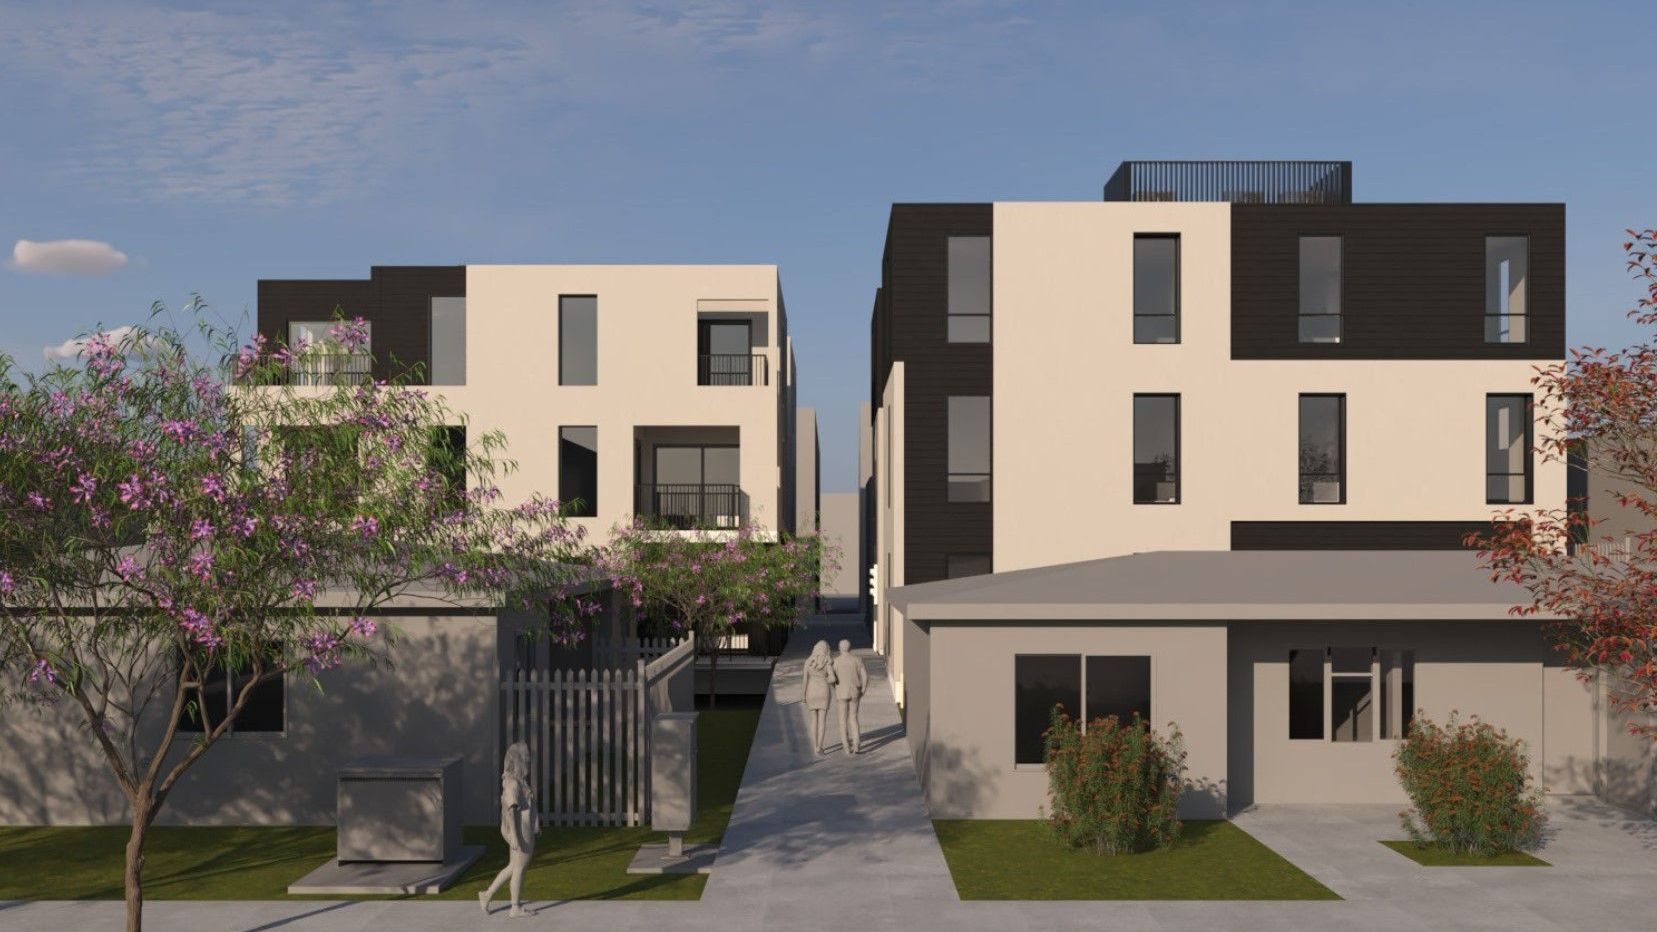 an artist 's impression of a row of apartment buildings